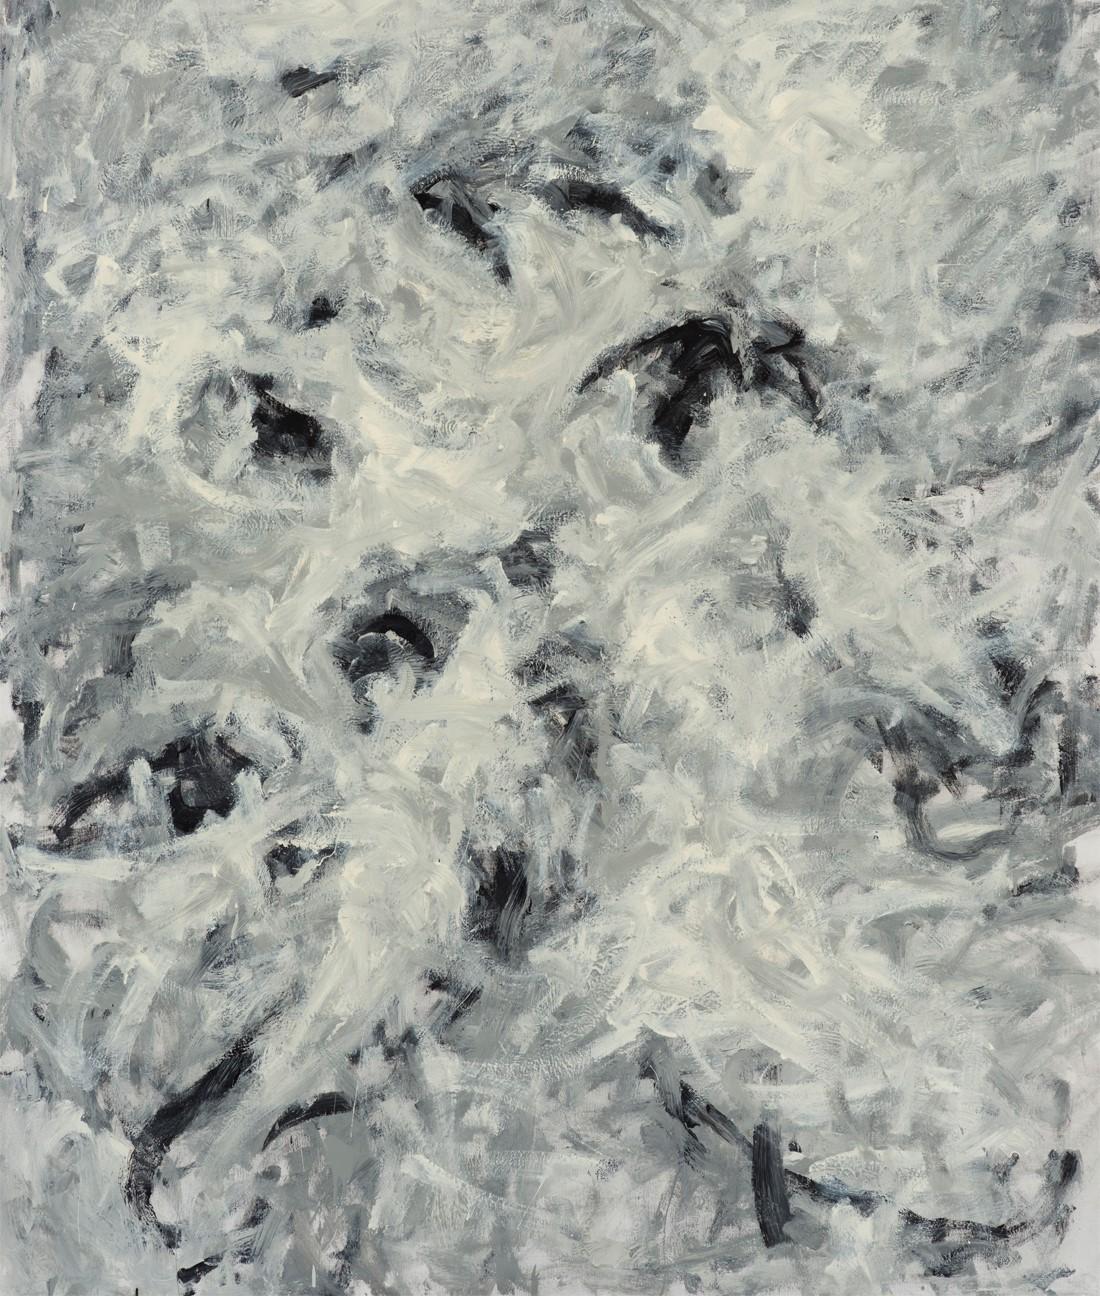 Untitled 011 [Remains of the Remains 011] - White, Black, Abstract Painting For Sale 3